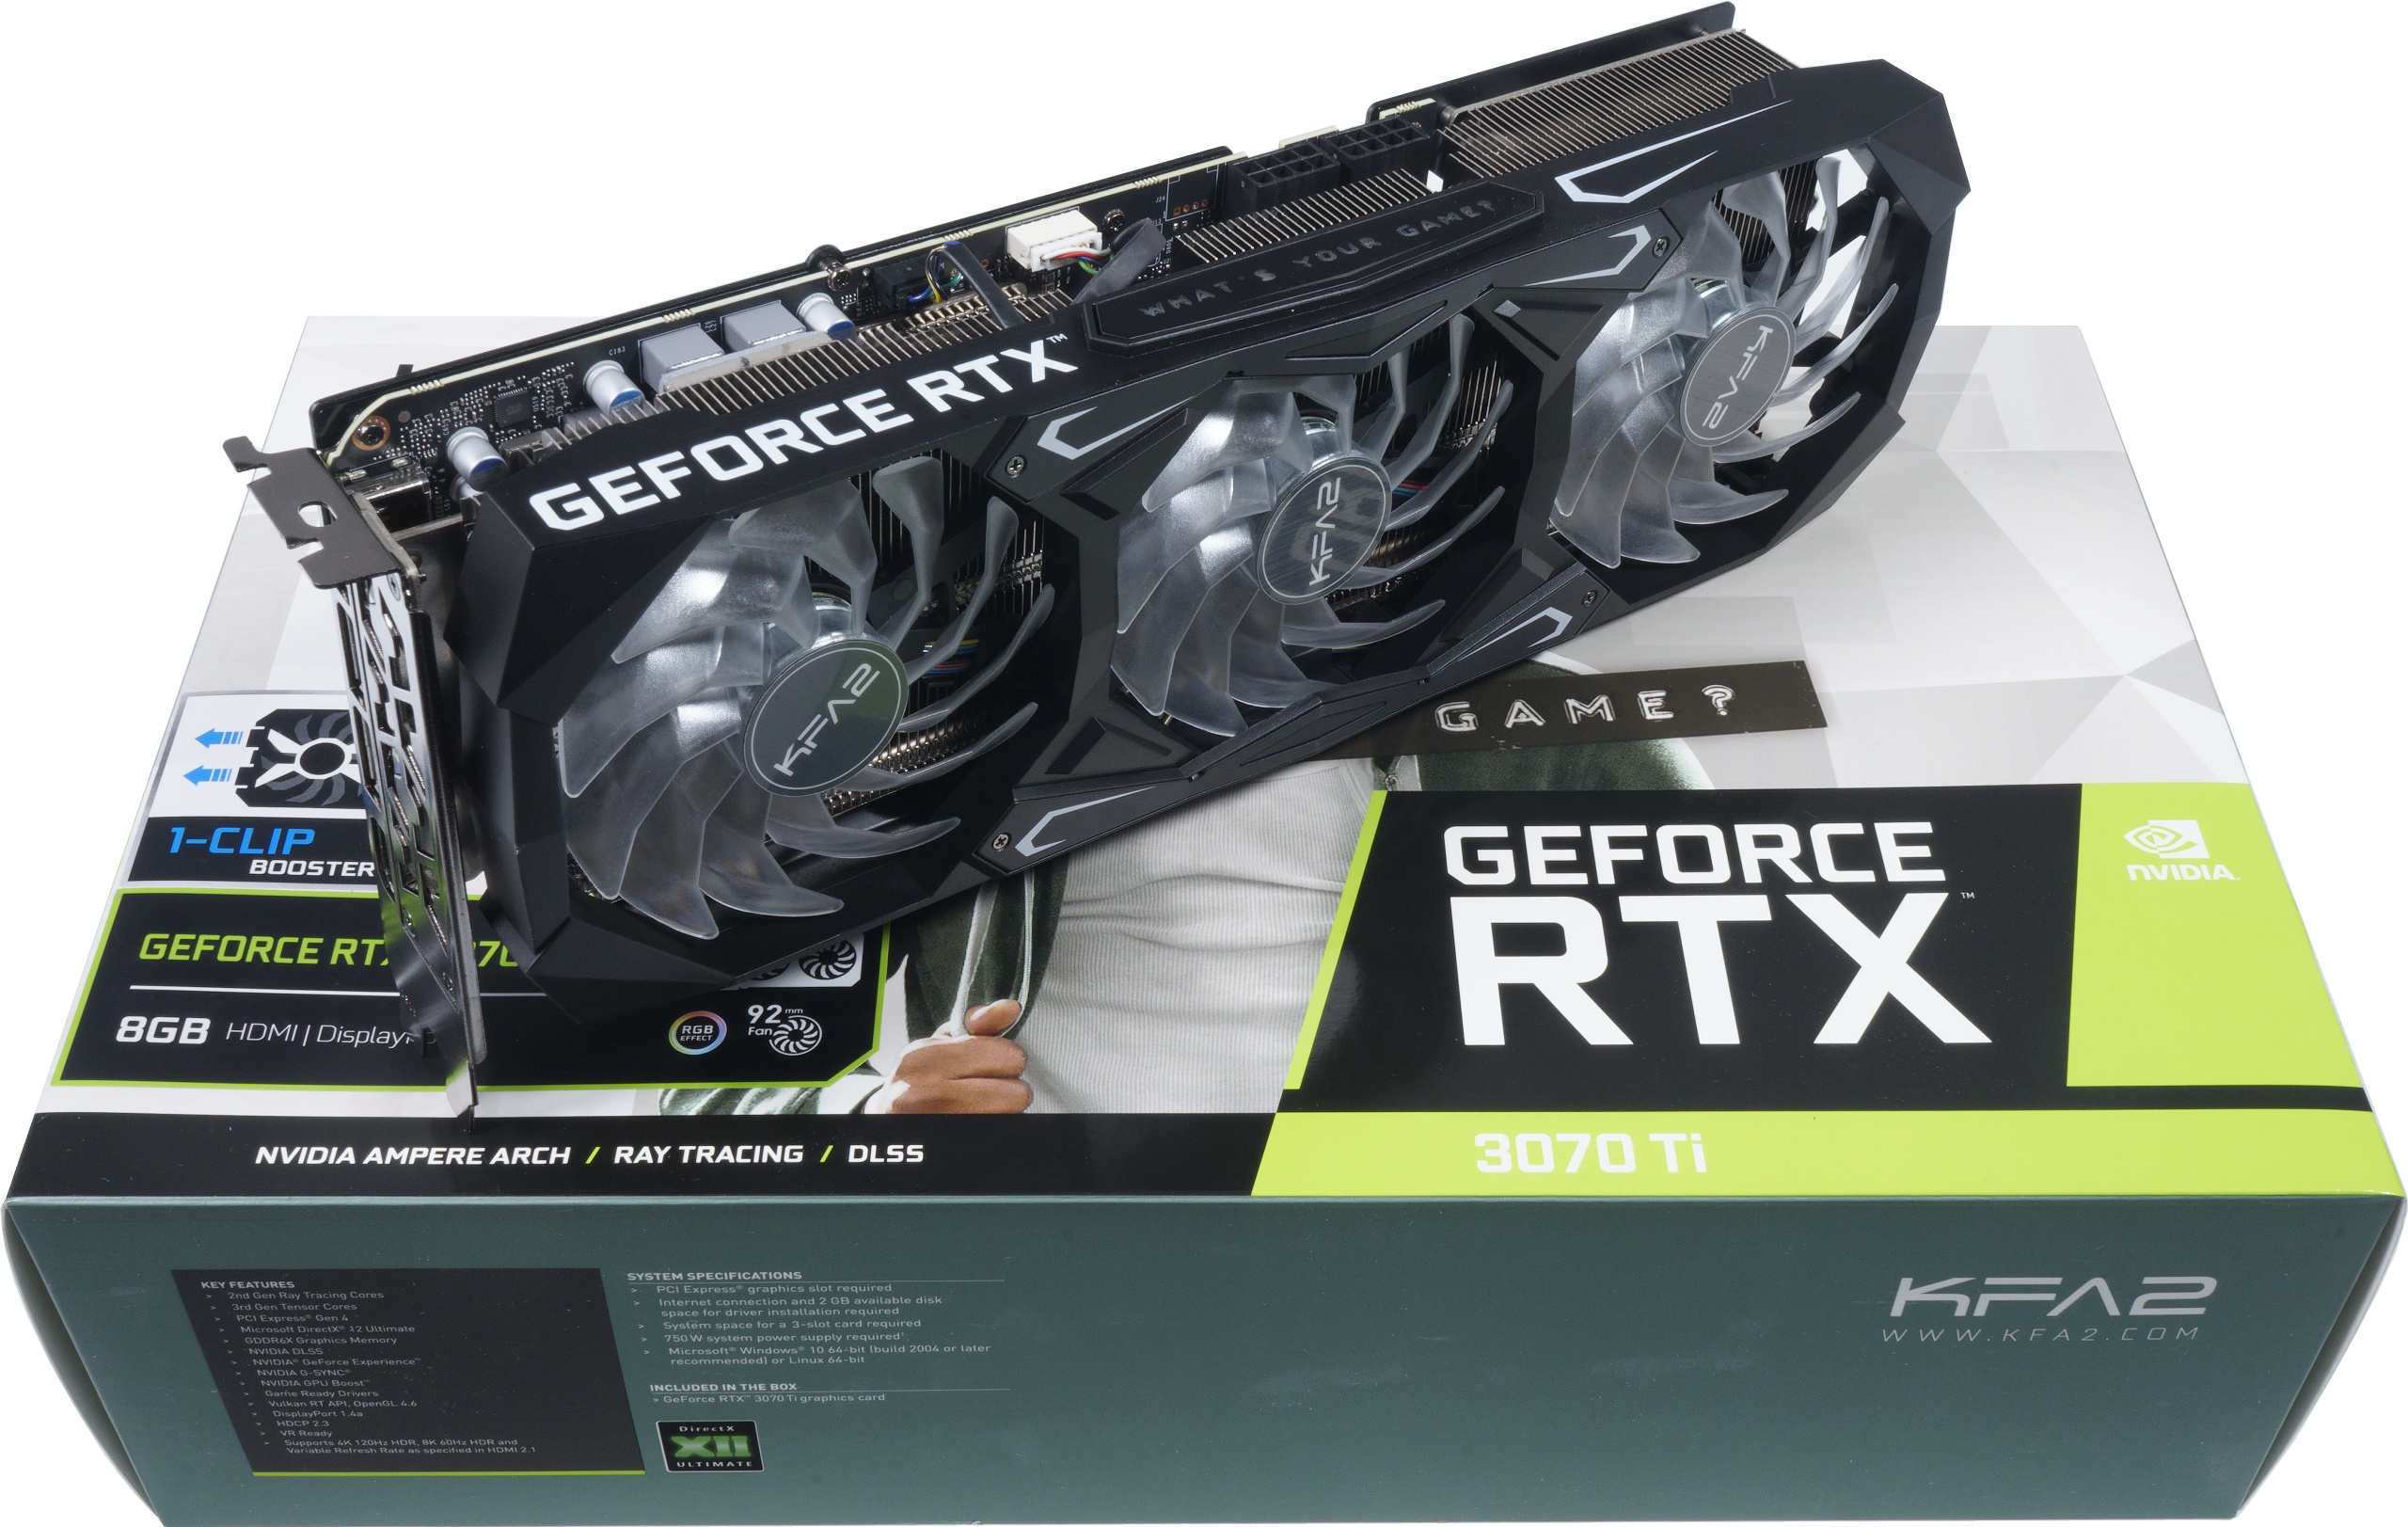 Nvidia GeForce RTX 3070 Ti Review: More Bandwidth, More Power